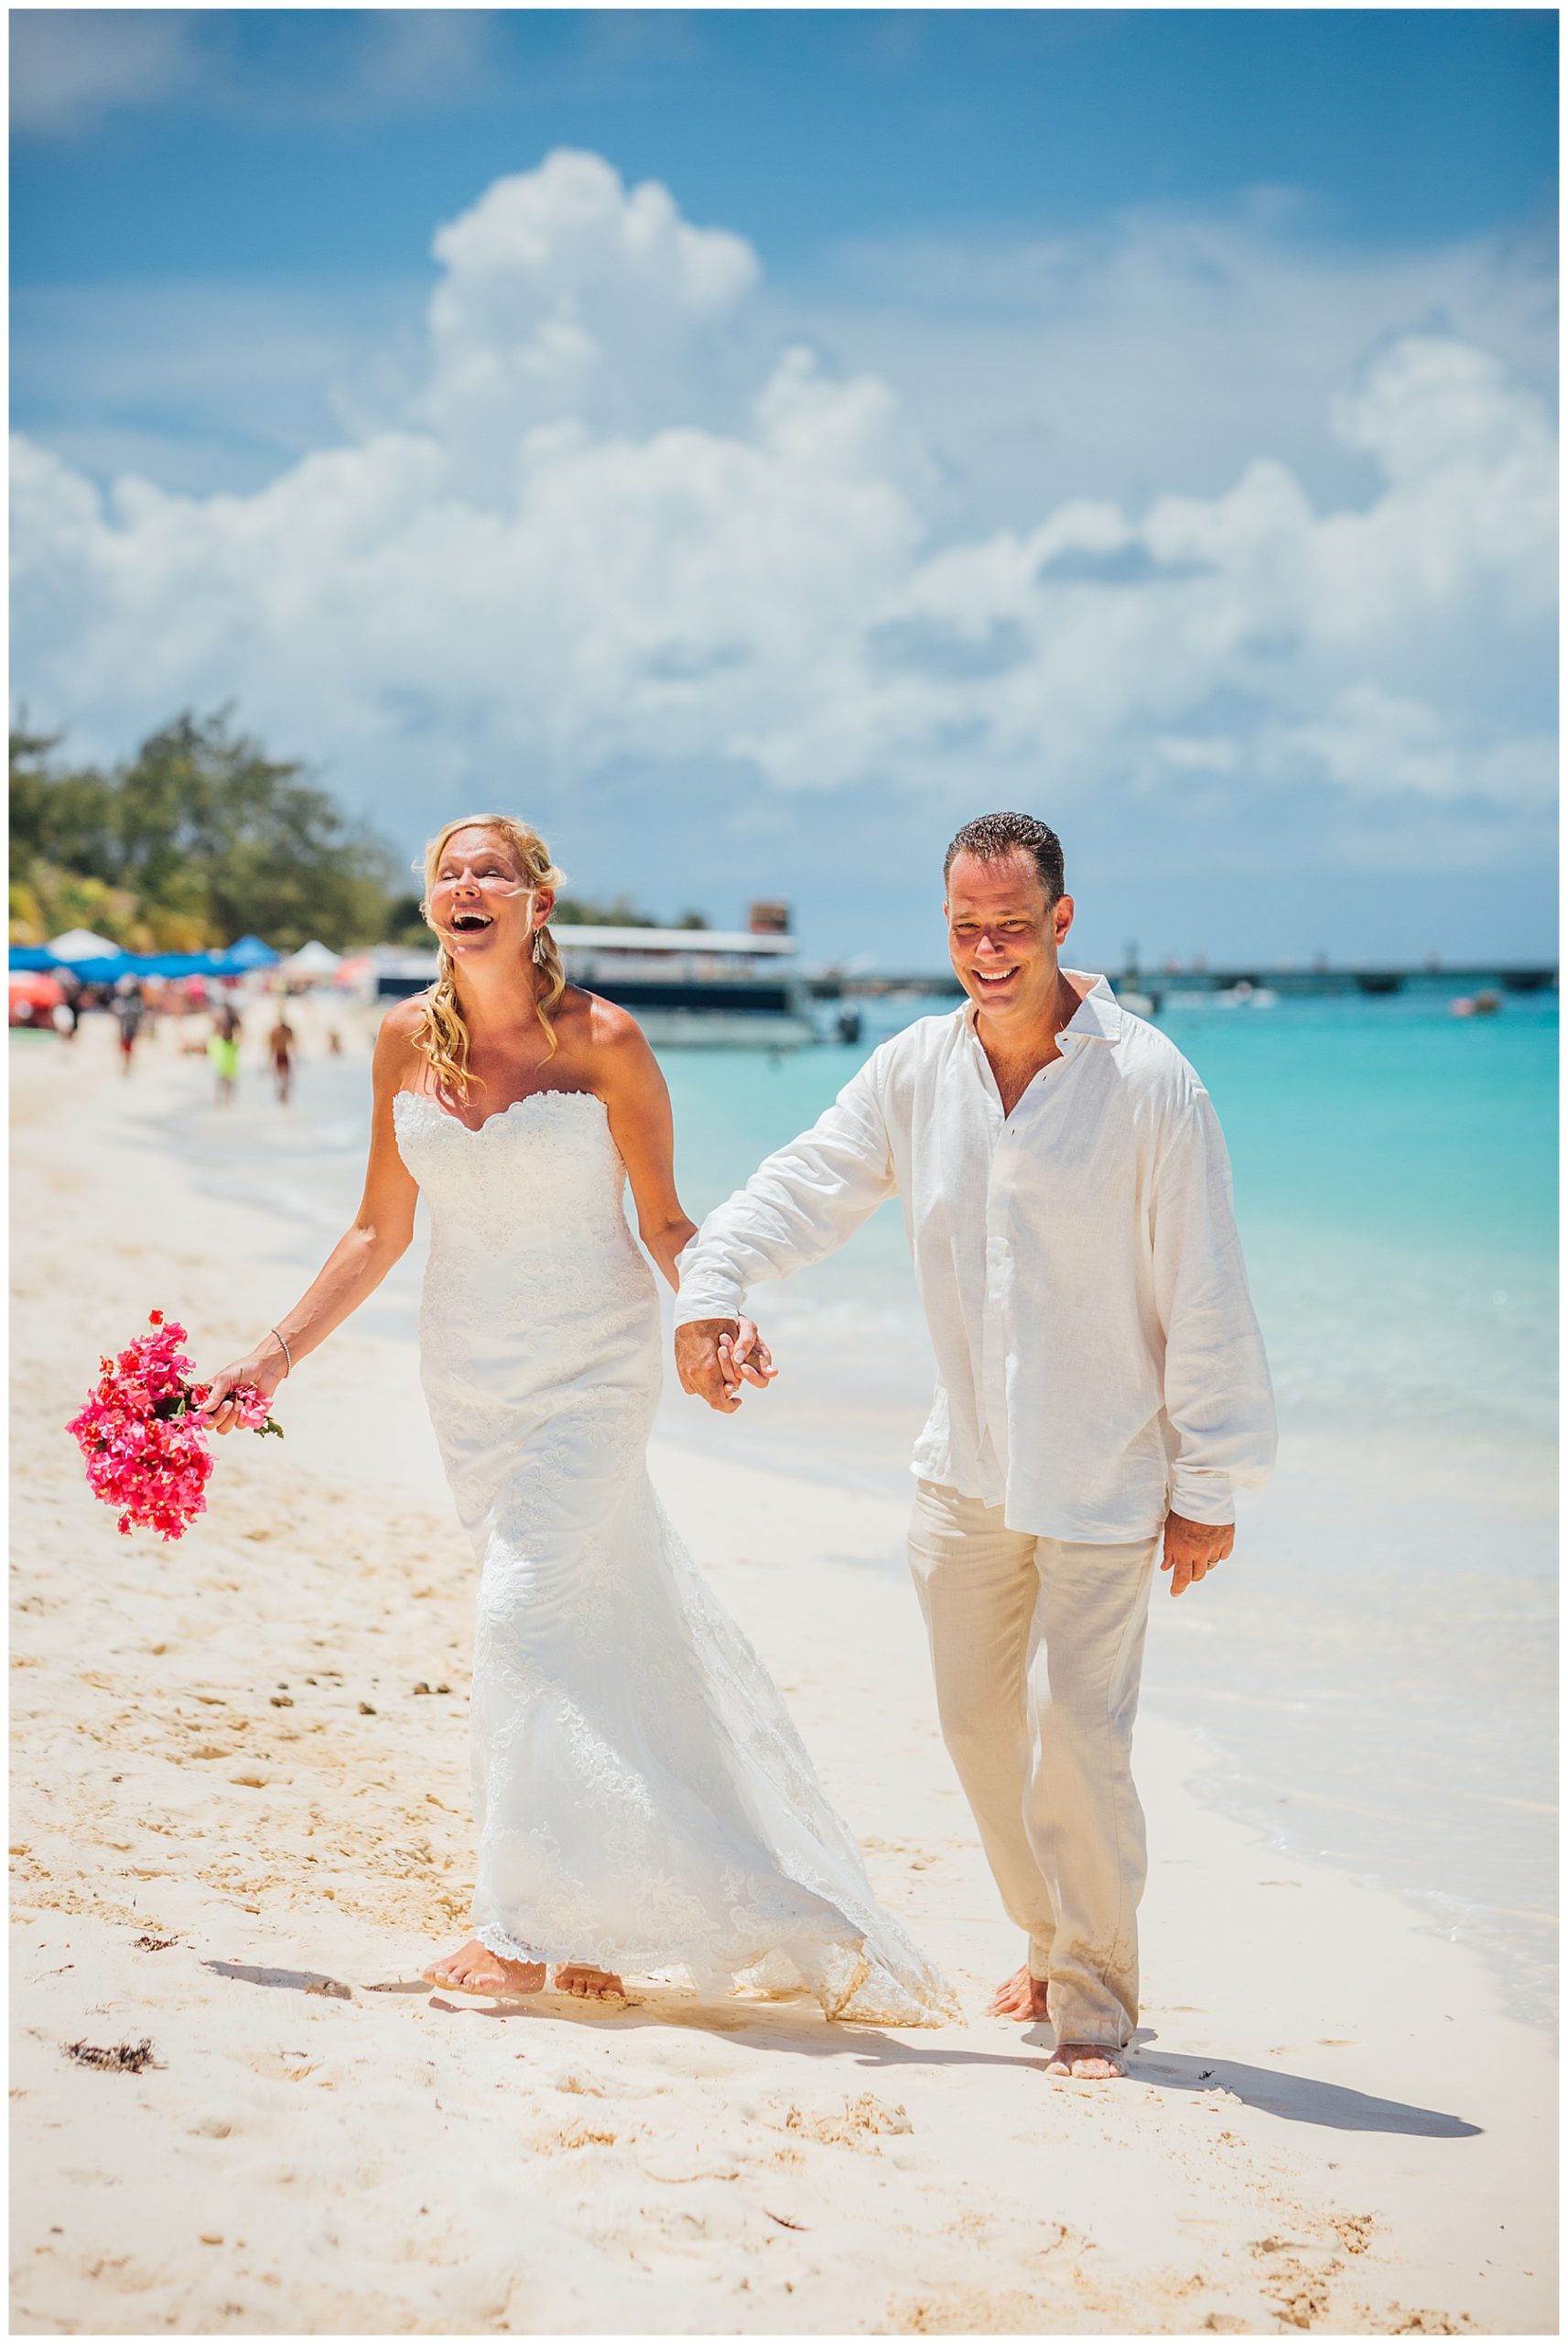 Bride and Groom on beach at Turks and Ciacos